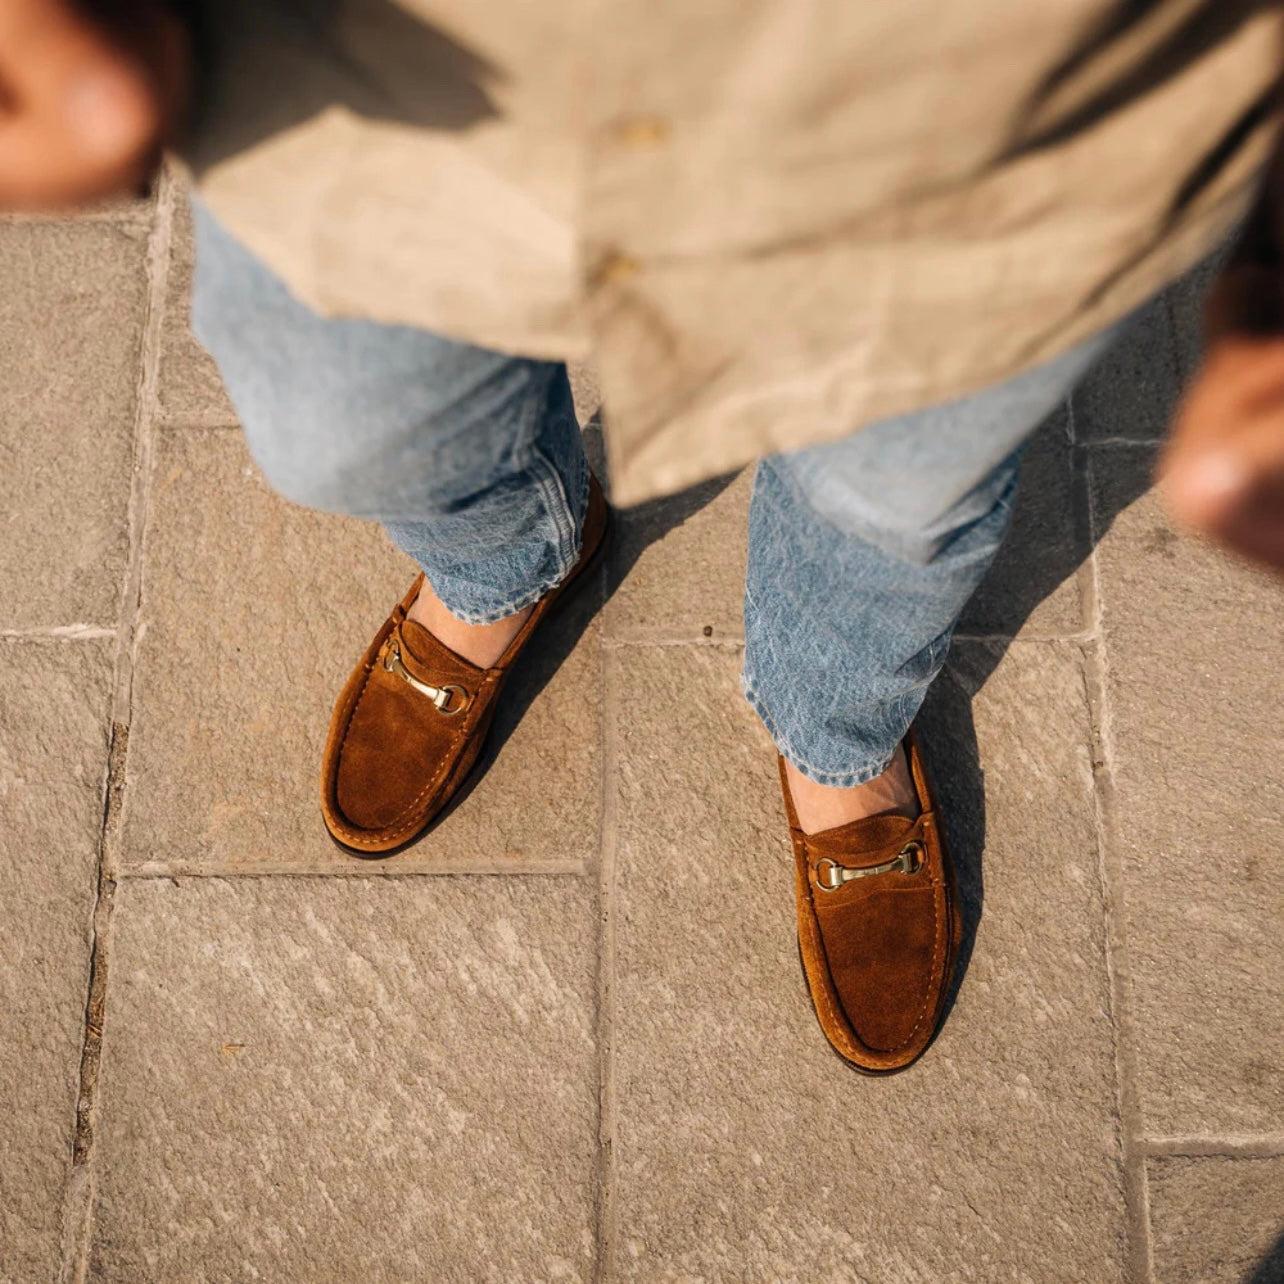 Shalapi Italian loafers for Men in suede Camel